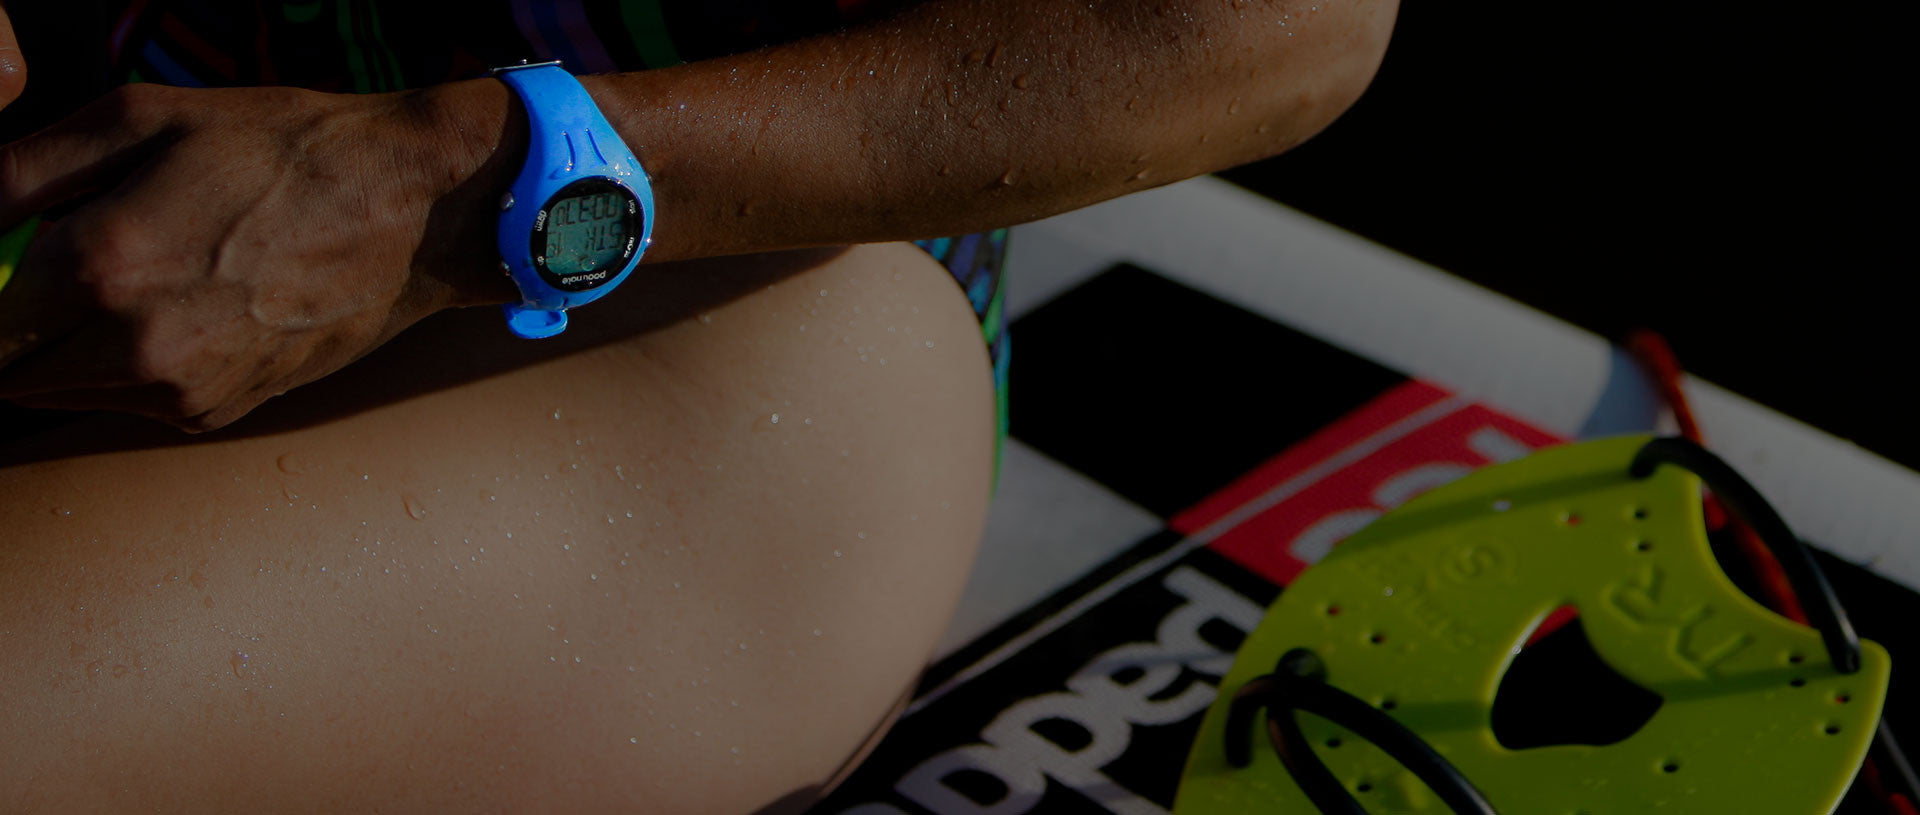 Poolmate Swimming Watches that Count your Laps!